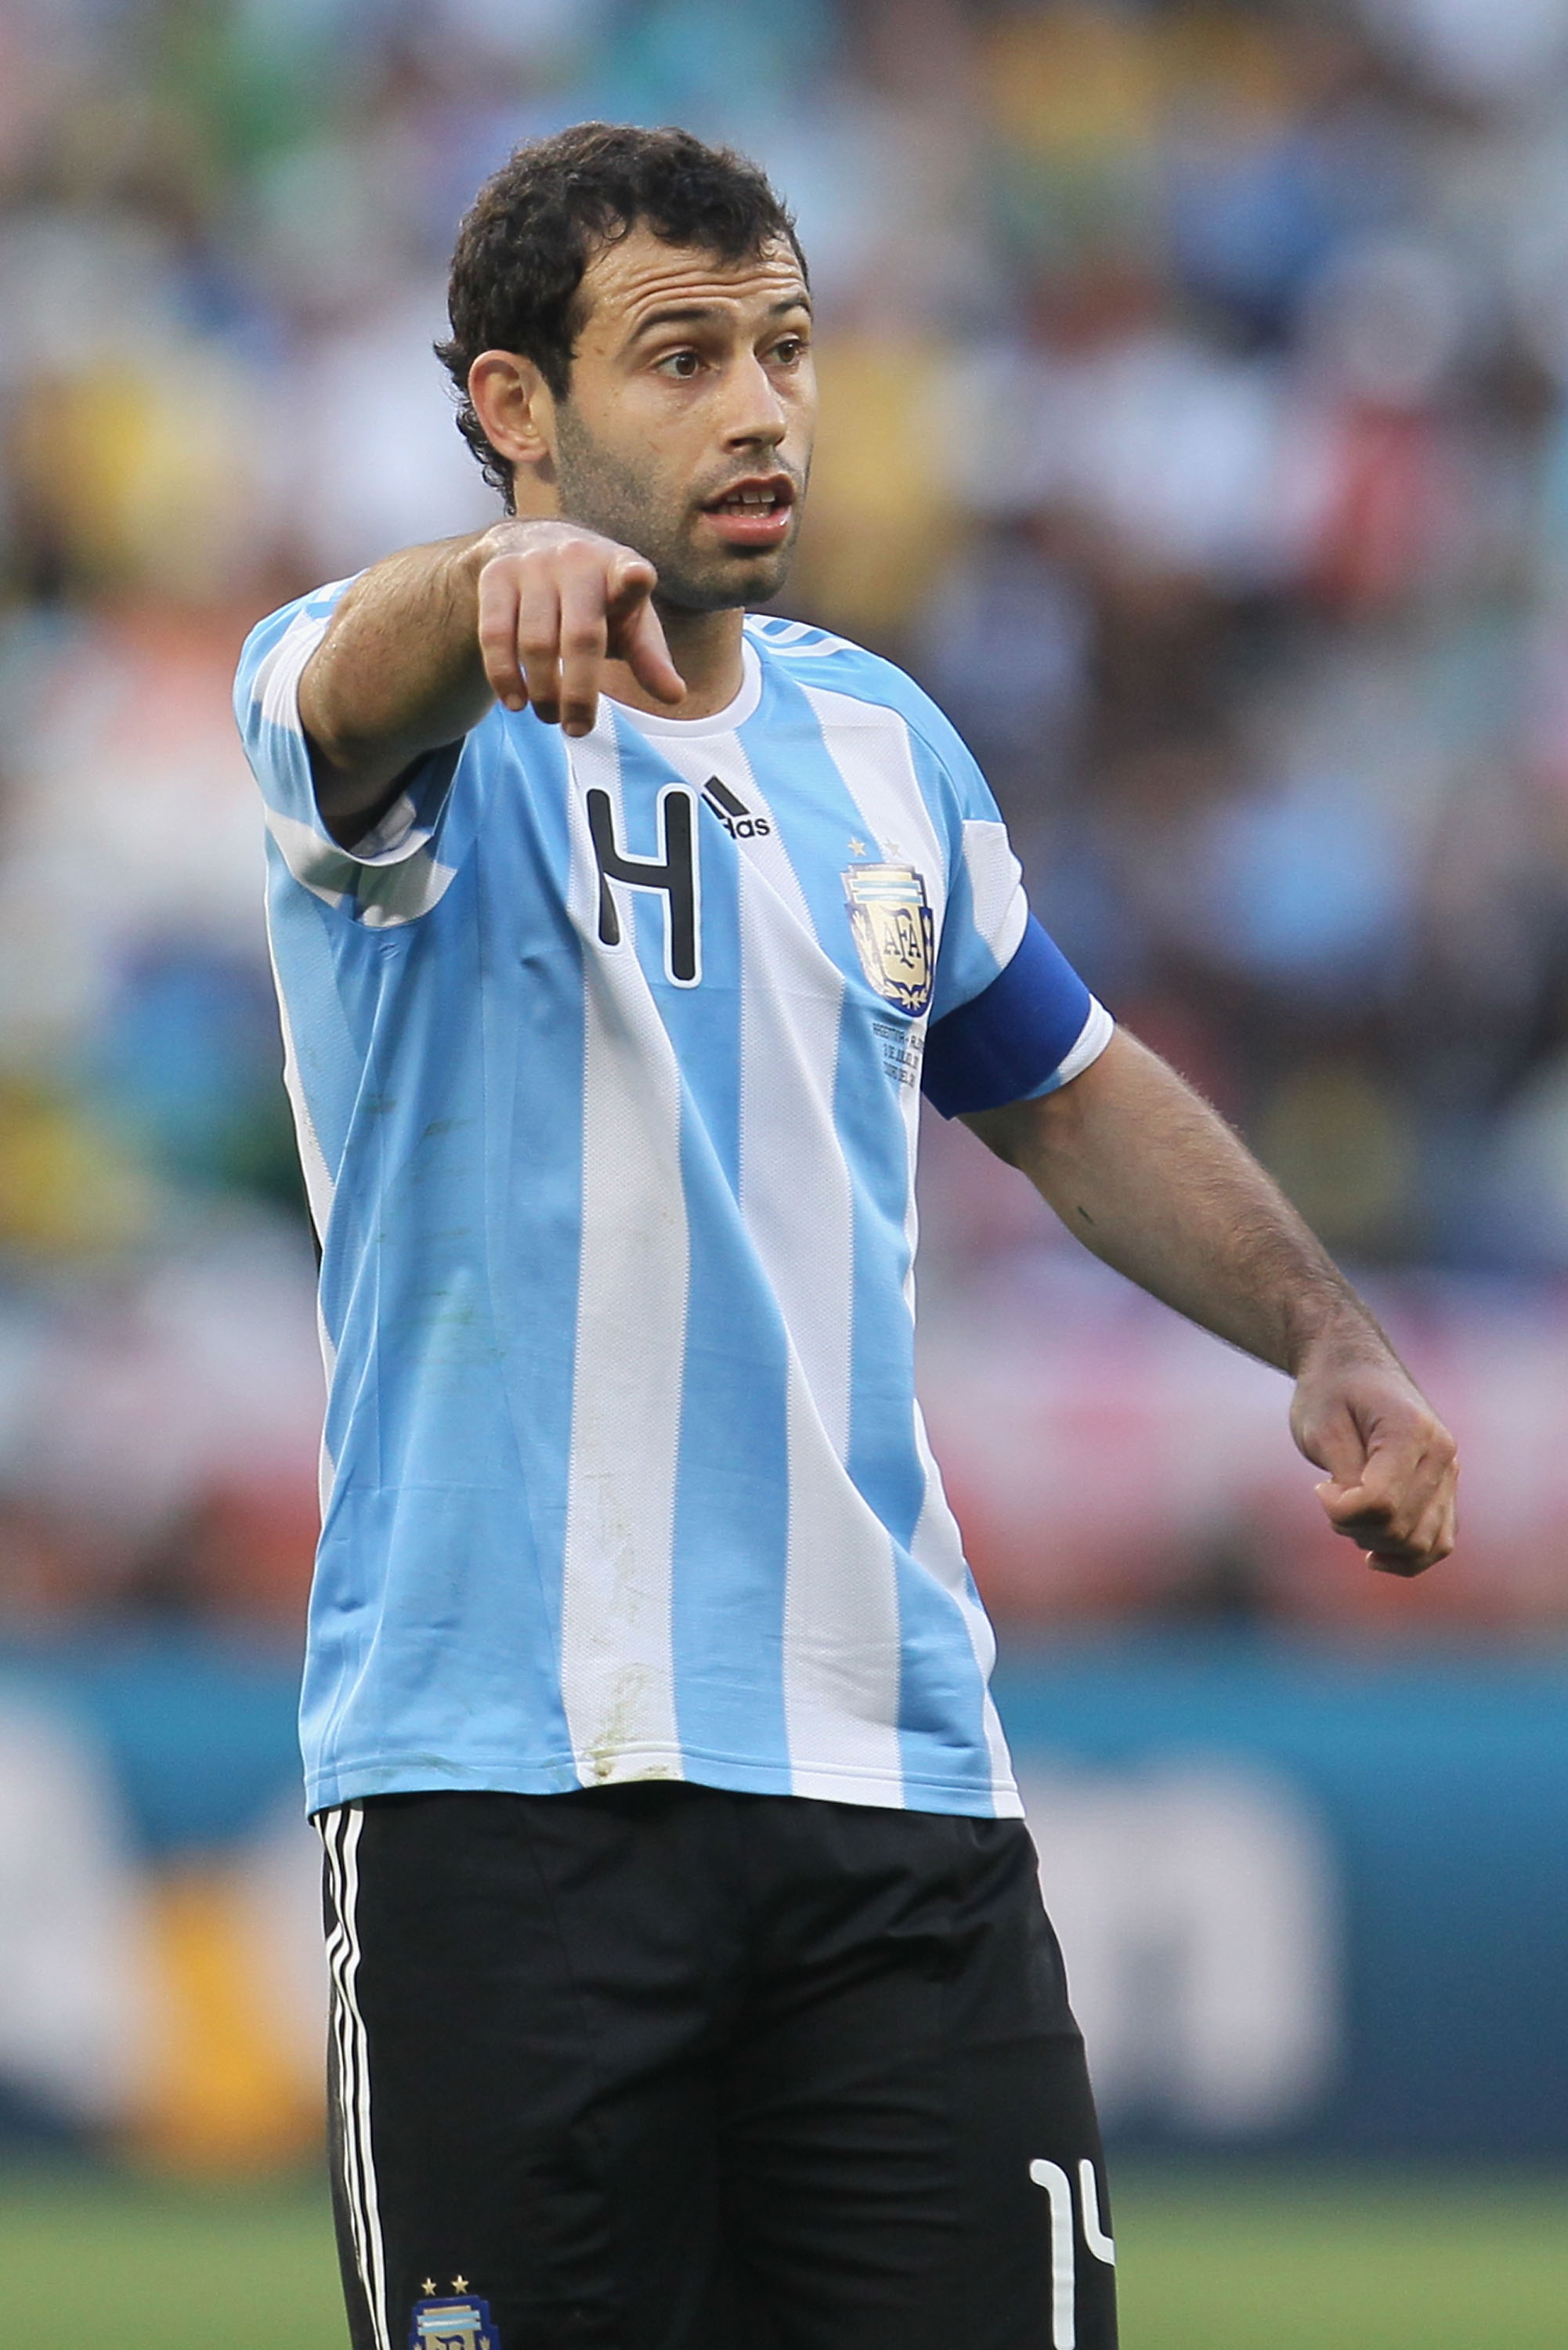 CAPE TOWN, SOUTH AFRICA - JULY 03: Javier Mascherano captain of Argentina, directs his team mates during the 2010 FIFA World Cup South Africa Quarter Final match between Argentina and Germany at Green Point Stadium on July 3, 2010 in Cape Town, South Afri